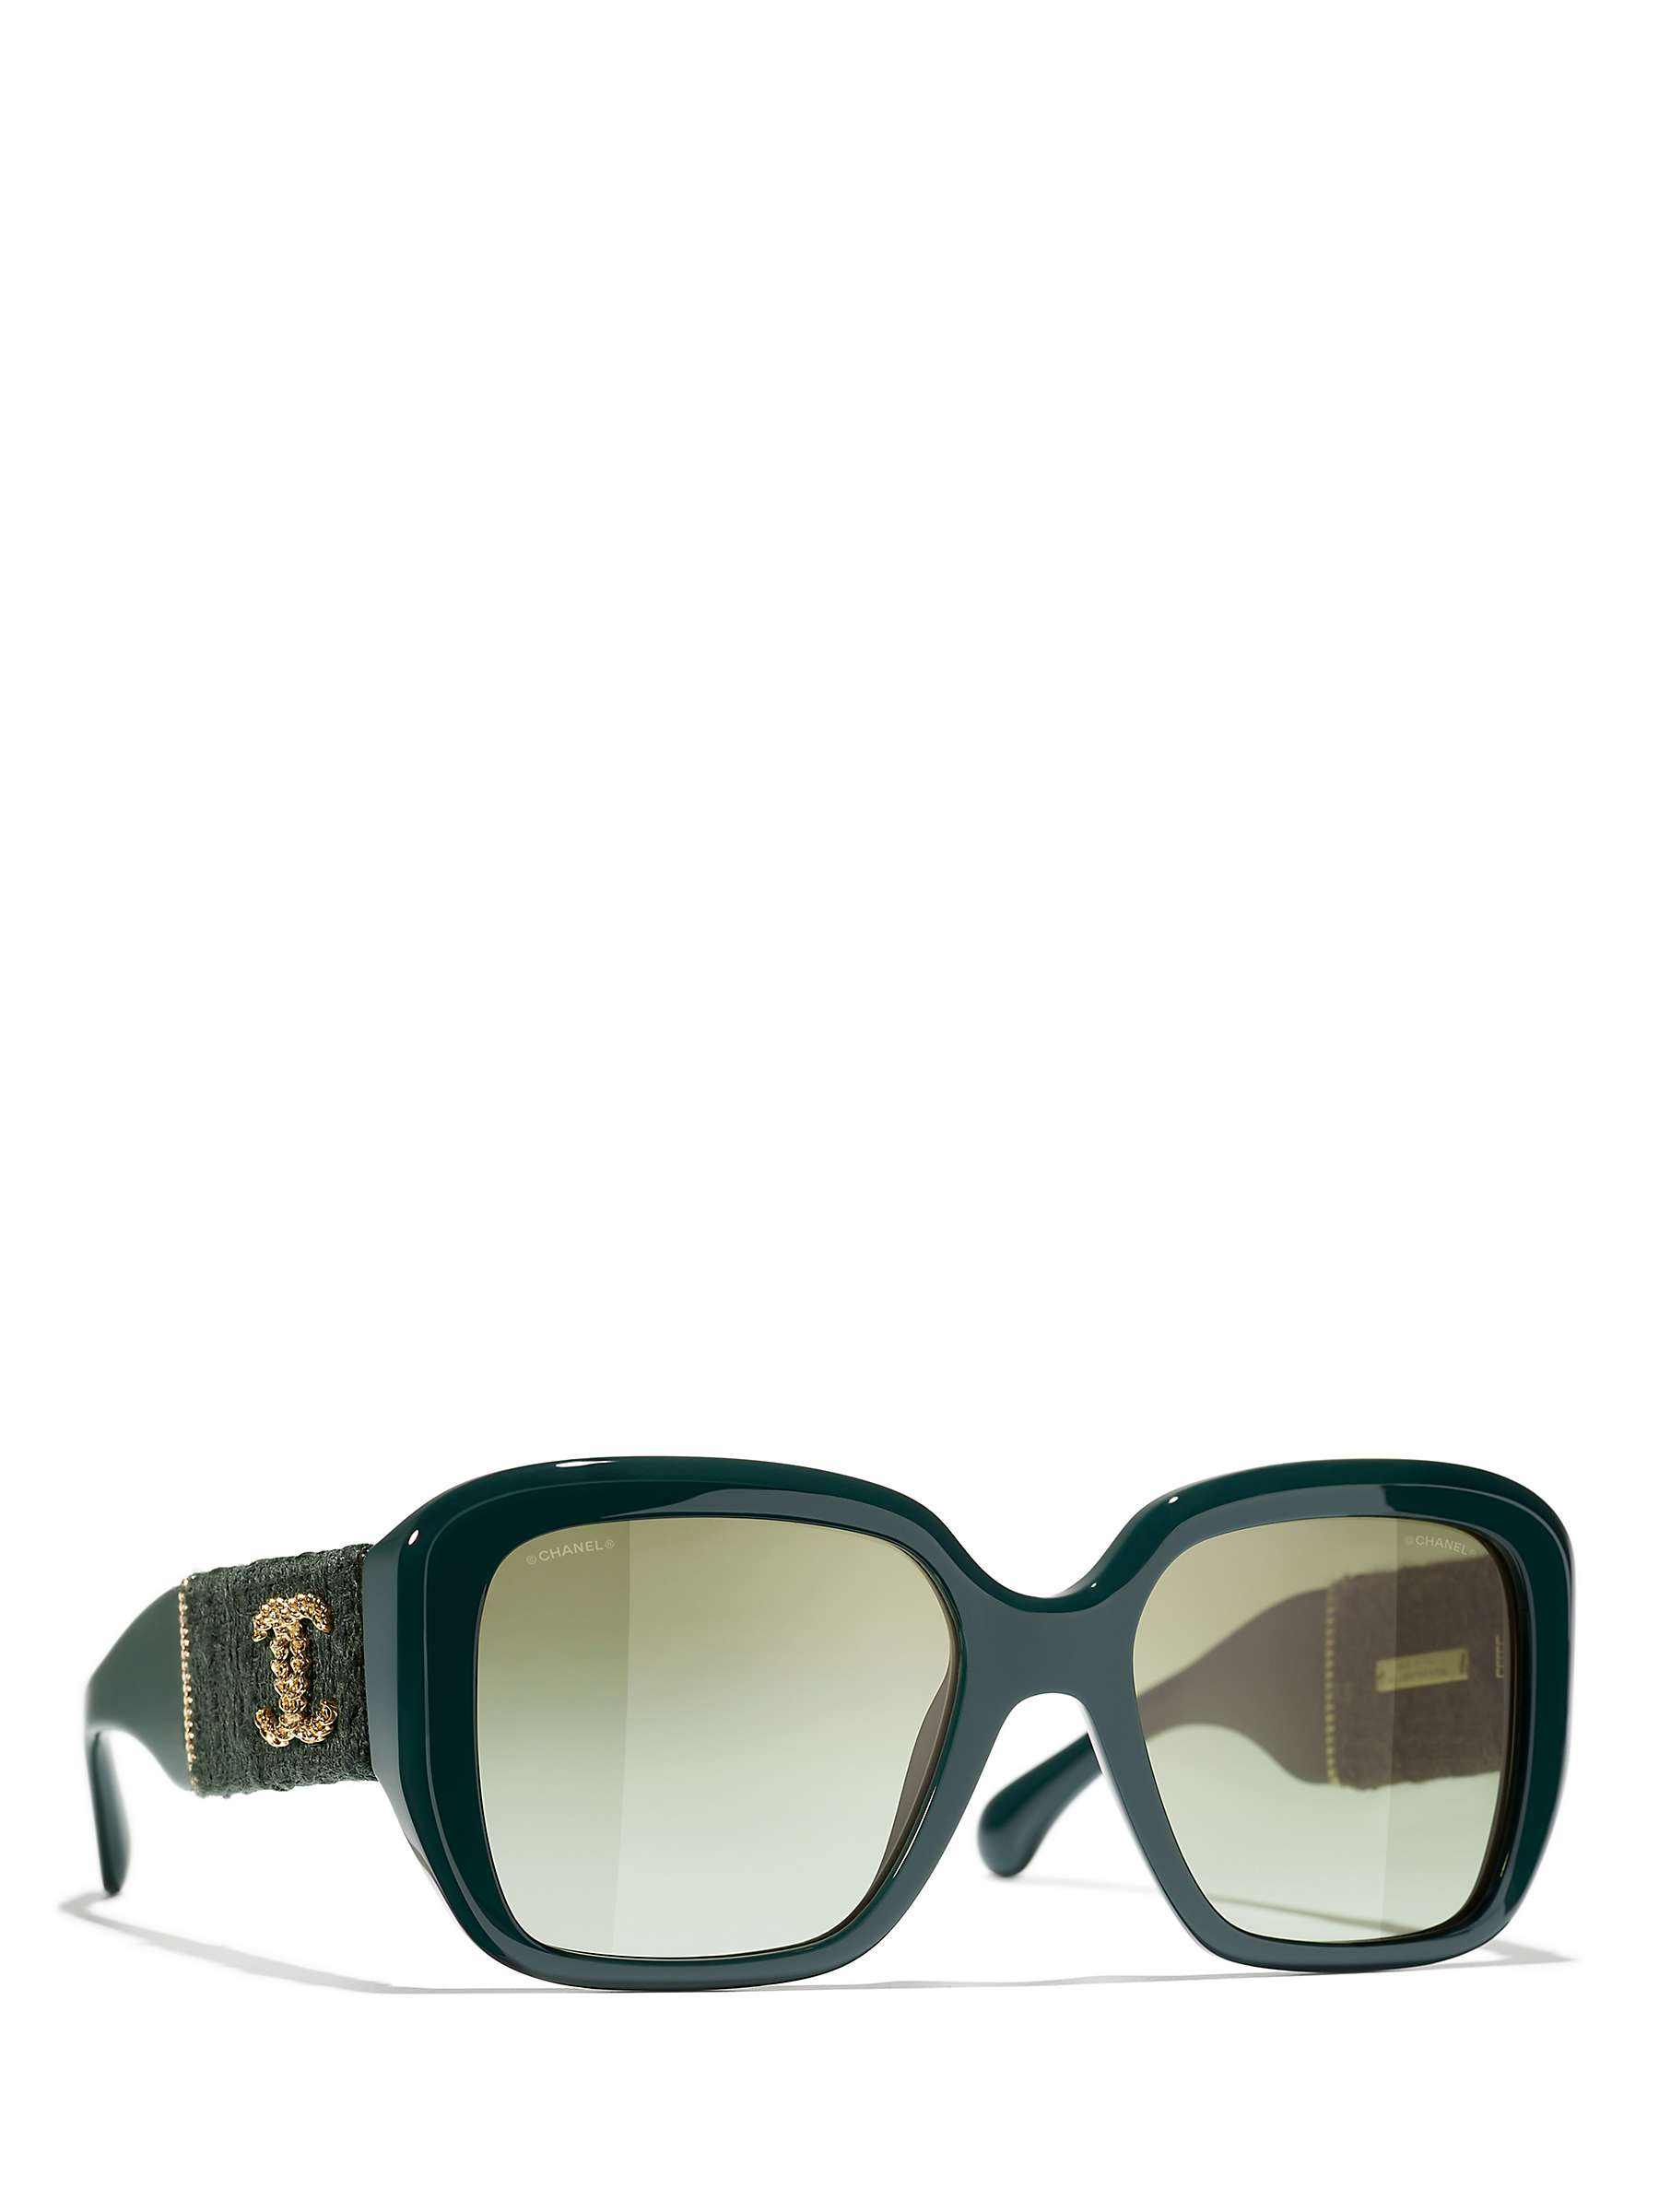 Buy CHANEL Square Sunglasses CH5512 Green Vandome/Green Gradient Online at johnlewis.com